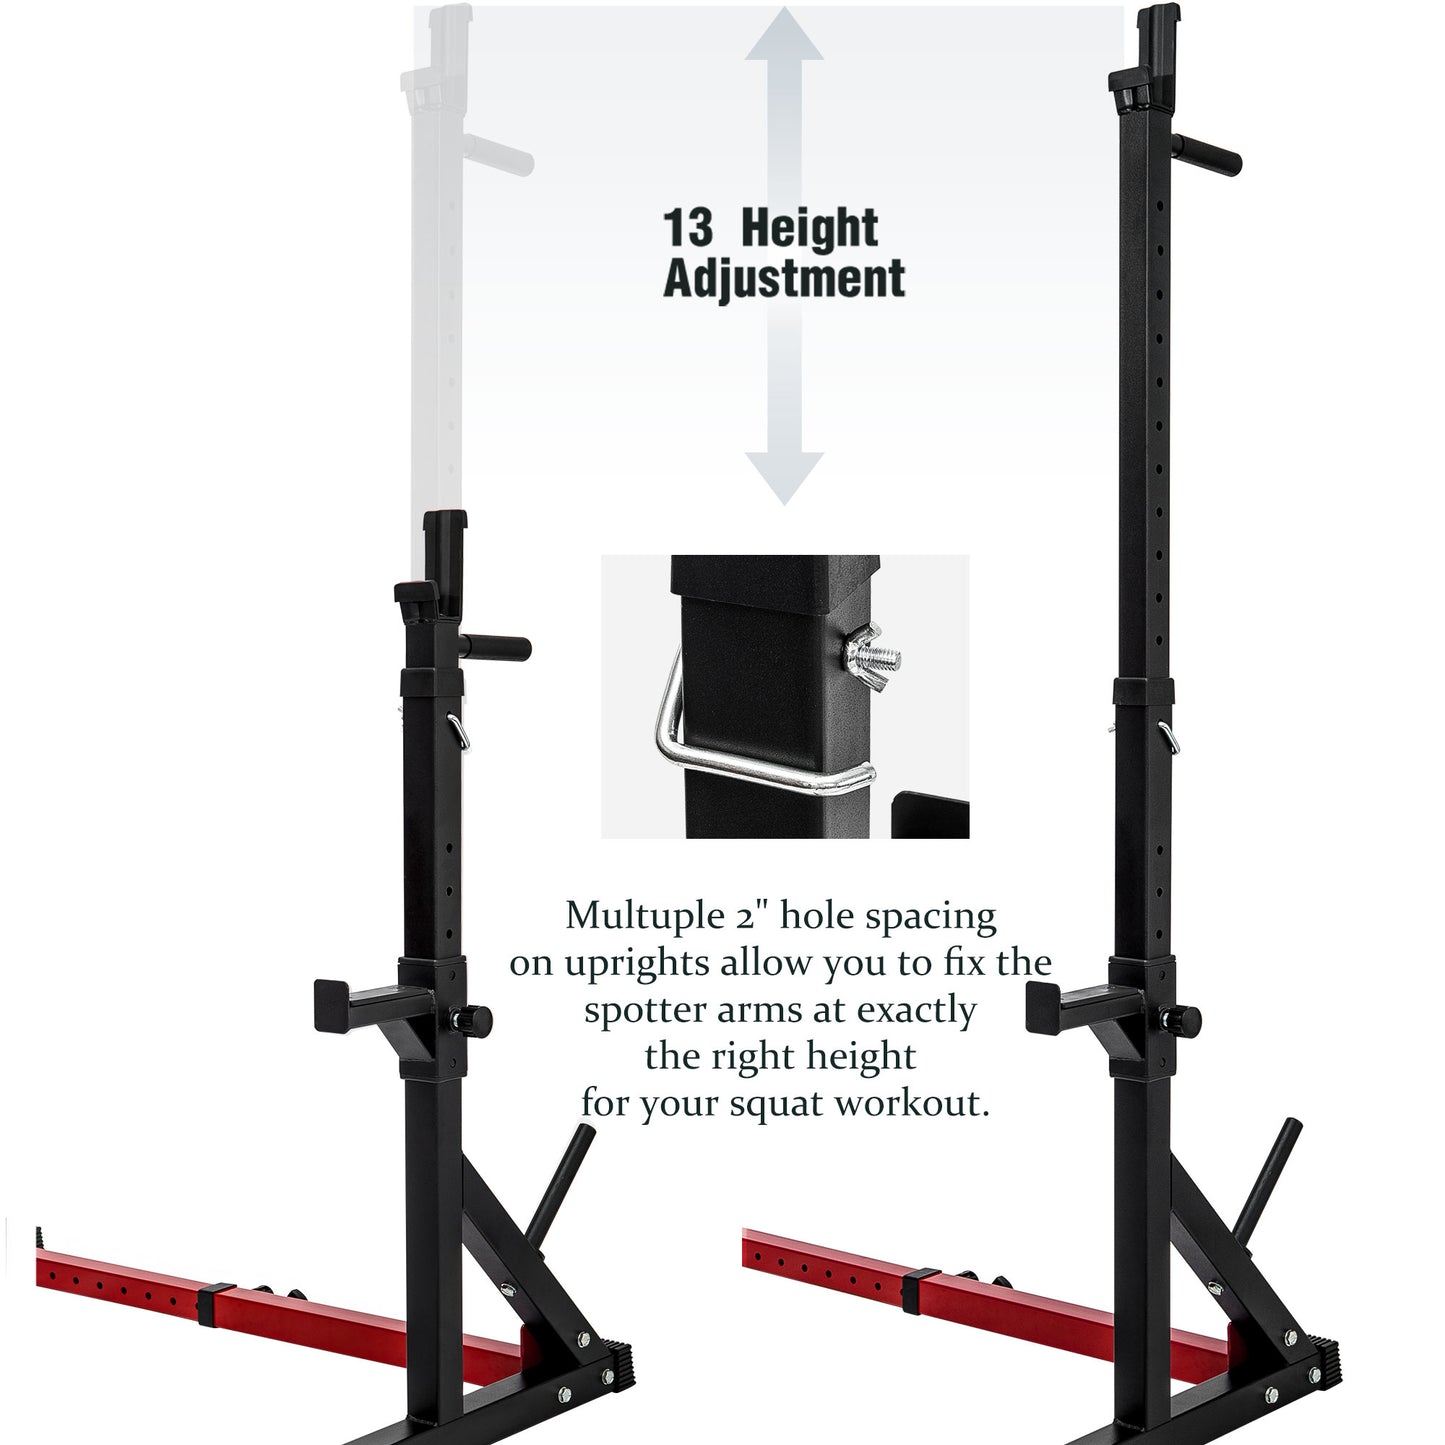 Adjustable Barbell Rack Max Load 550LBS Multi-Function Dipping Station Squat Stand Home Gym Fitness Weight Bench Press Stand